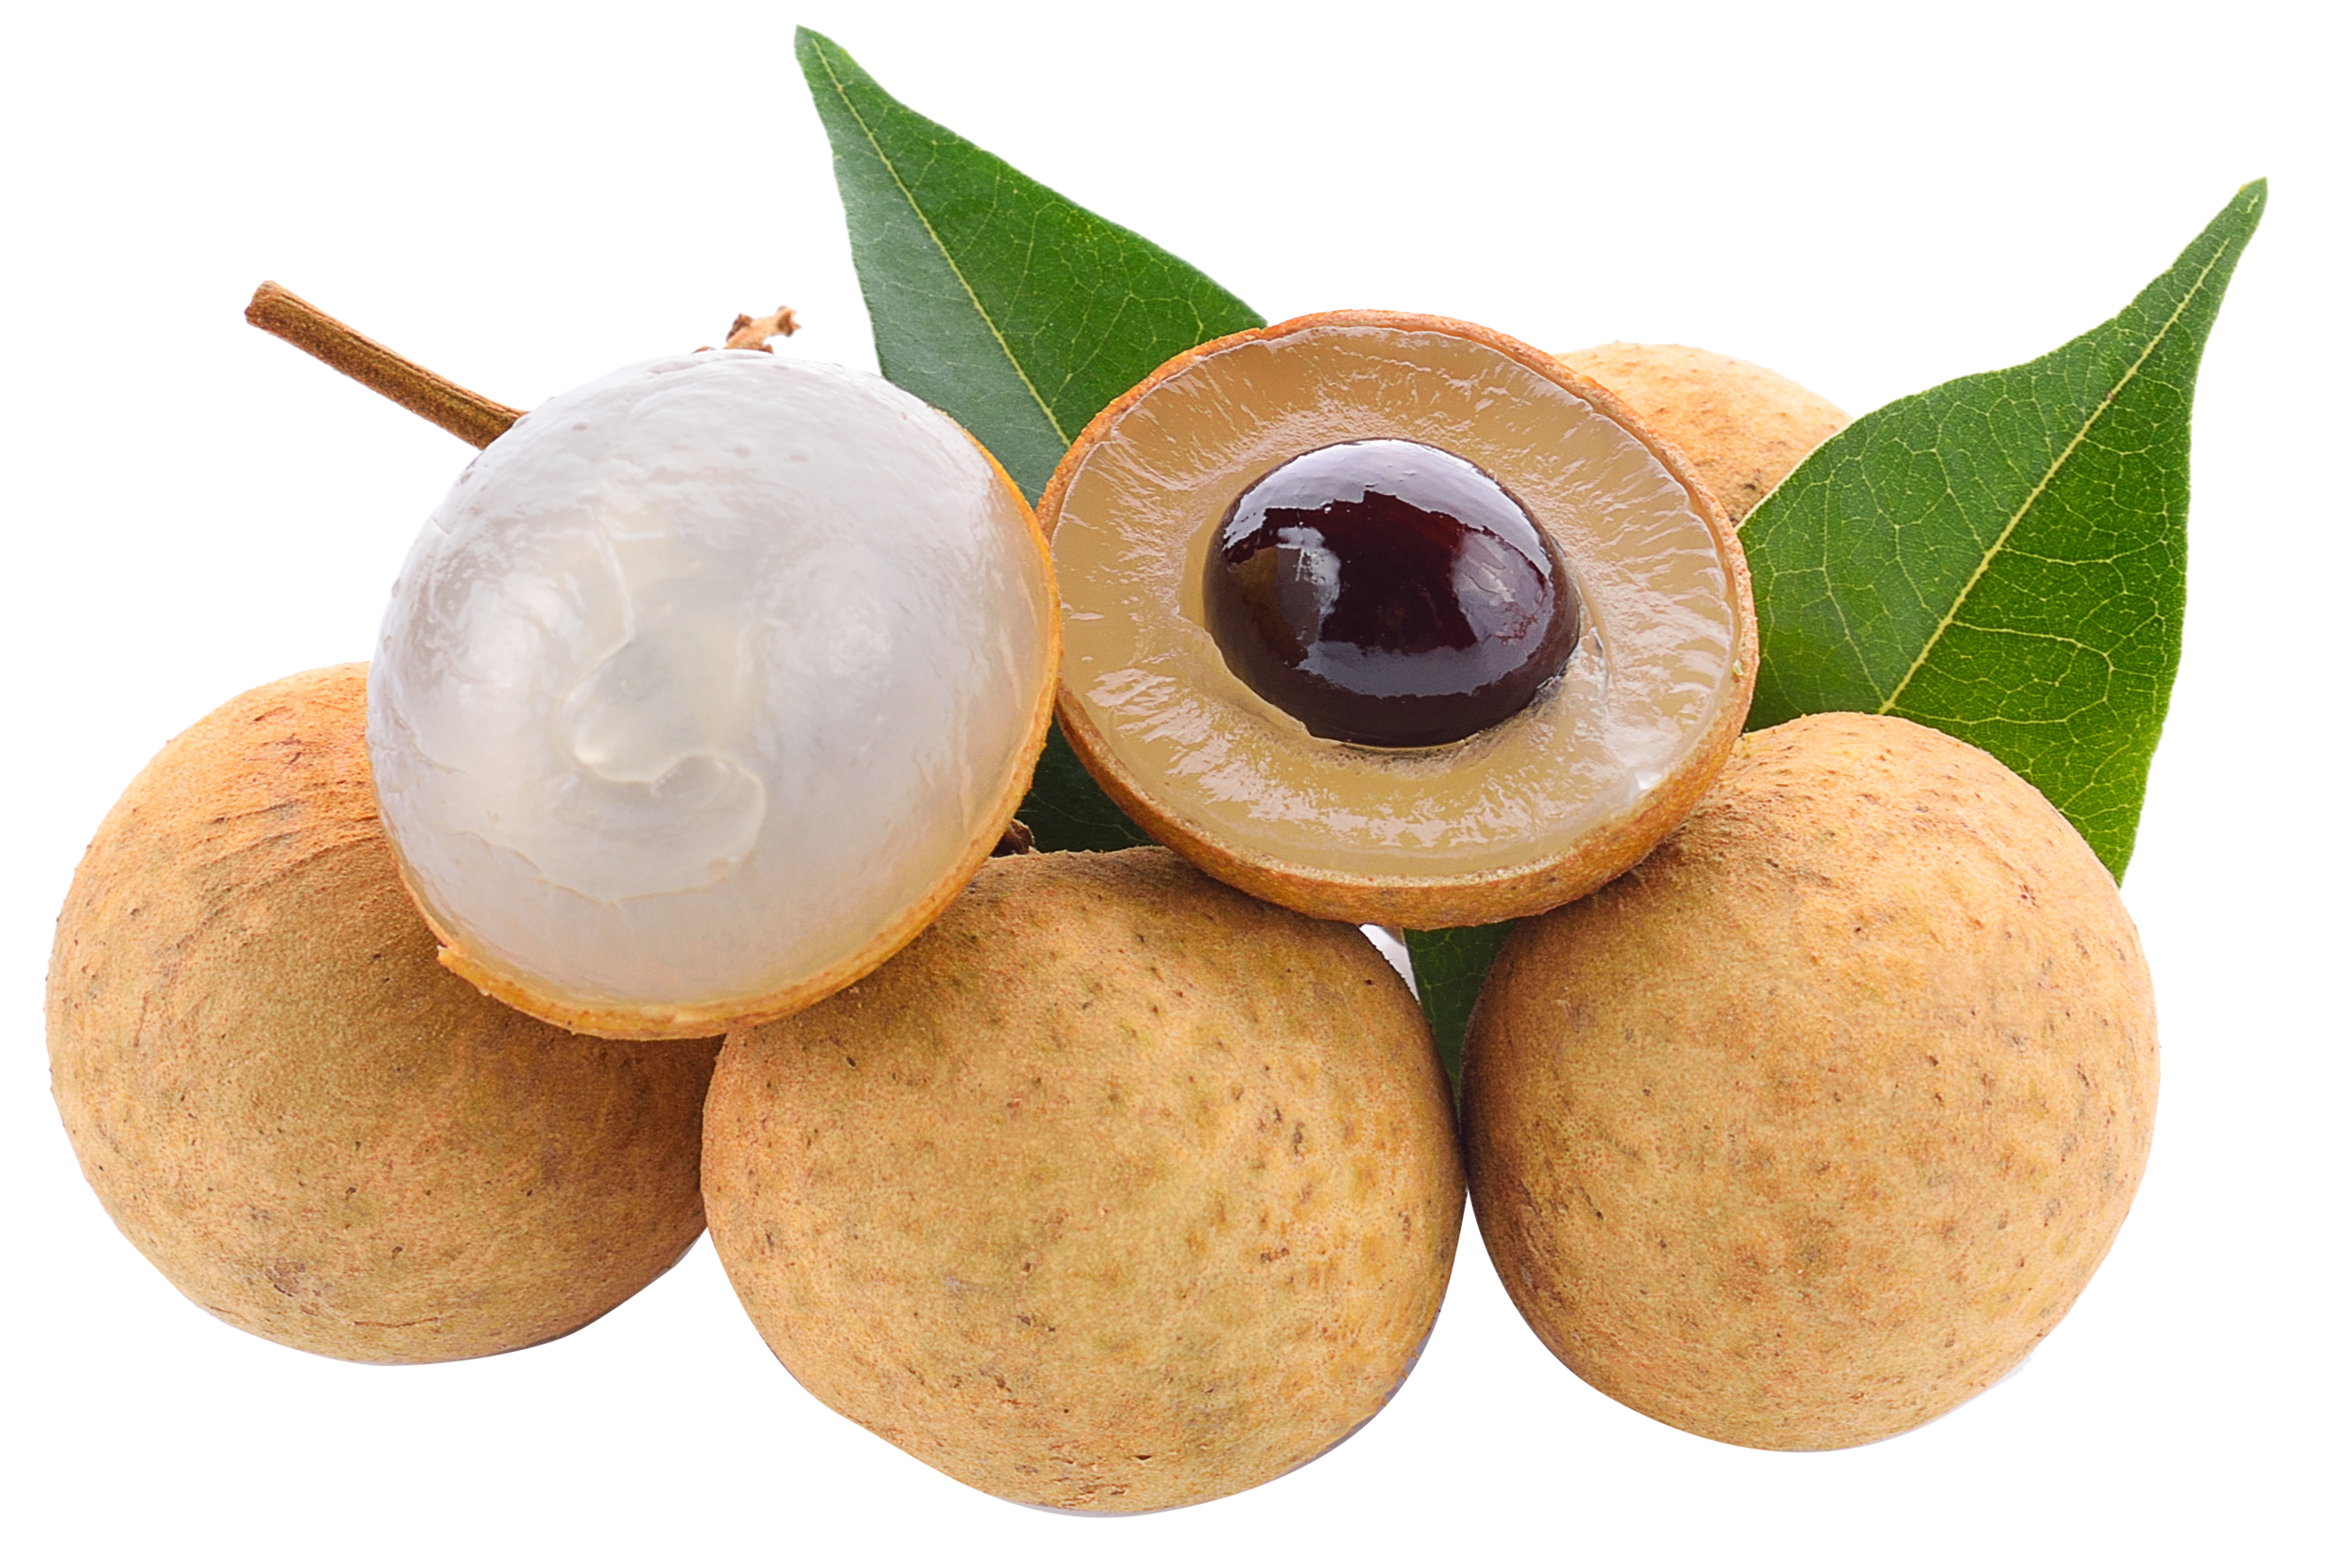 A Group Of Longan Fruits With Leaves